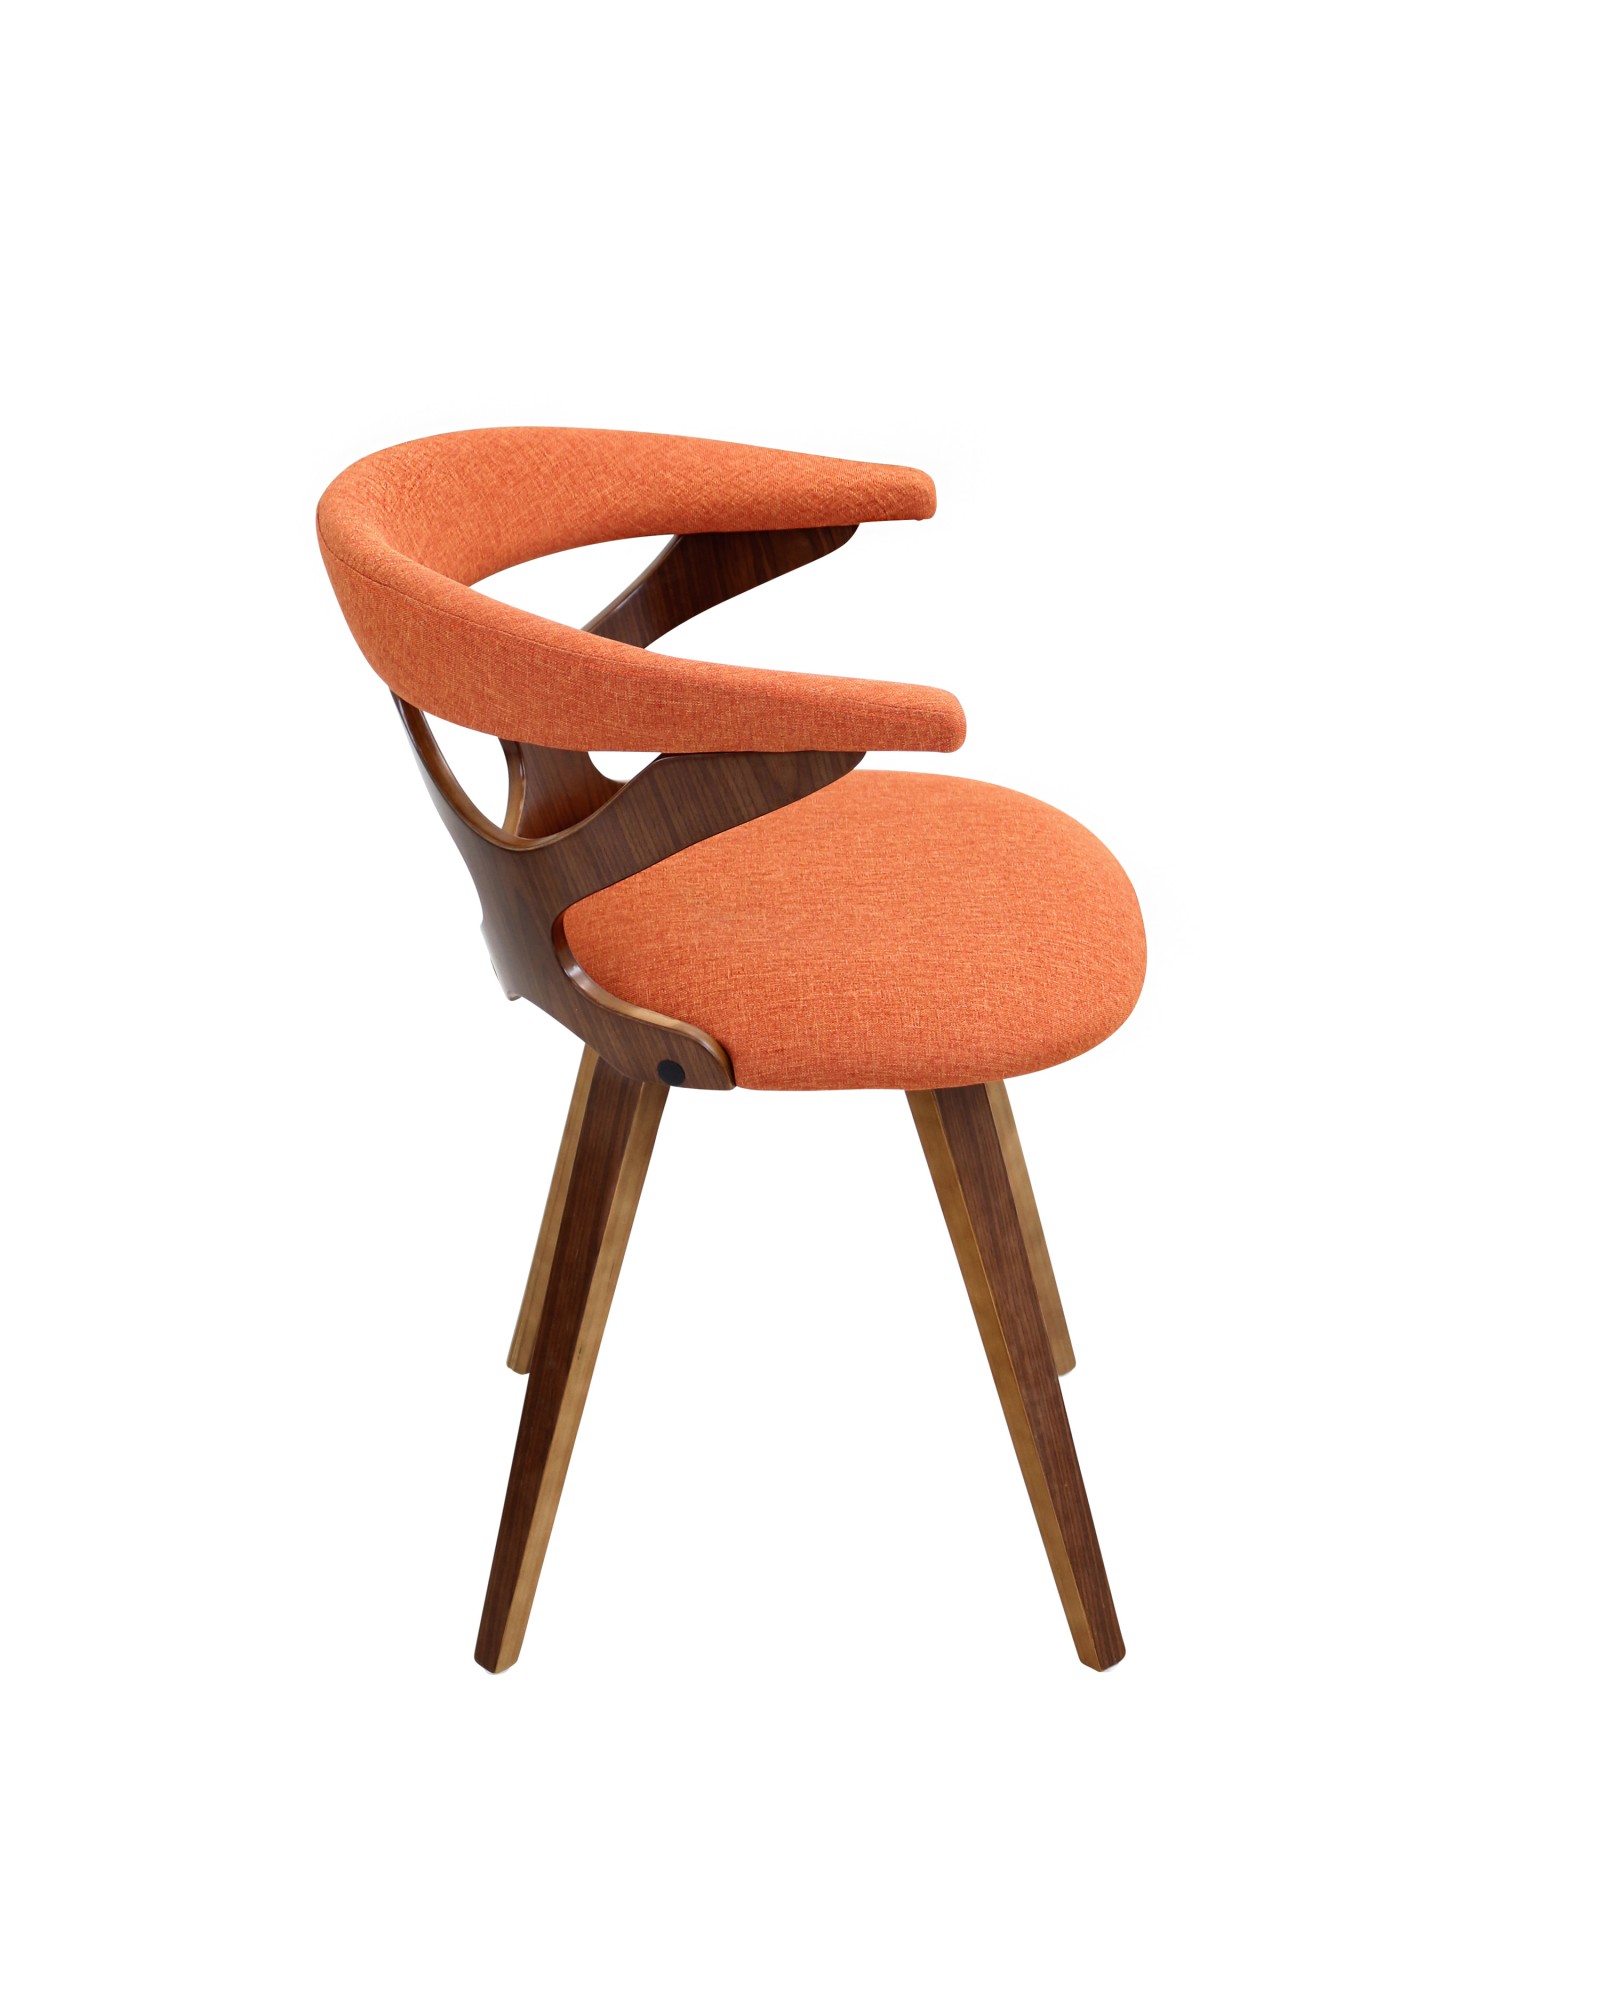 Gardenia Mid-century Modern Dining/Accent Chair with Swivel in Walnut Wood and Orange Fabric